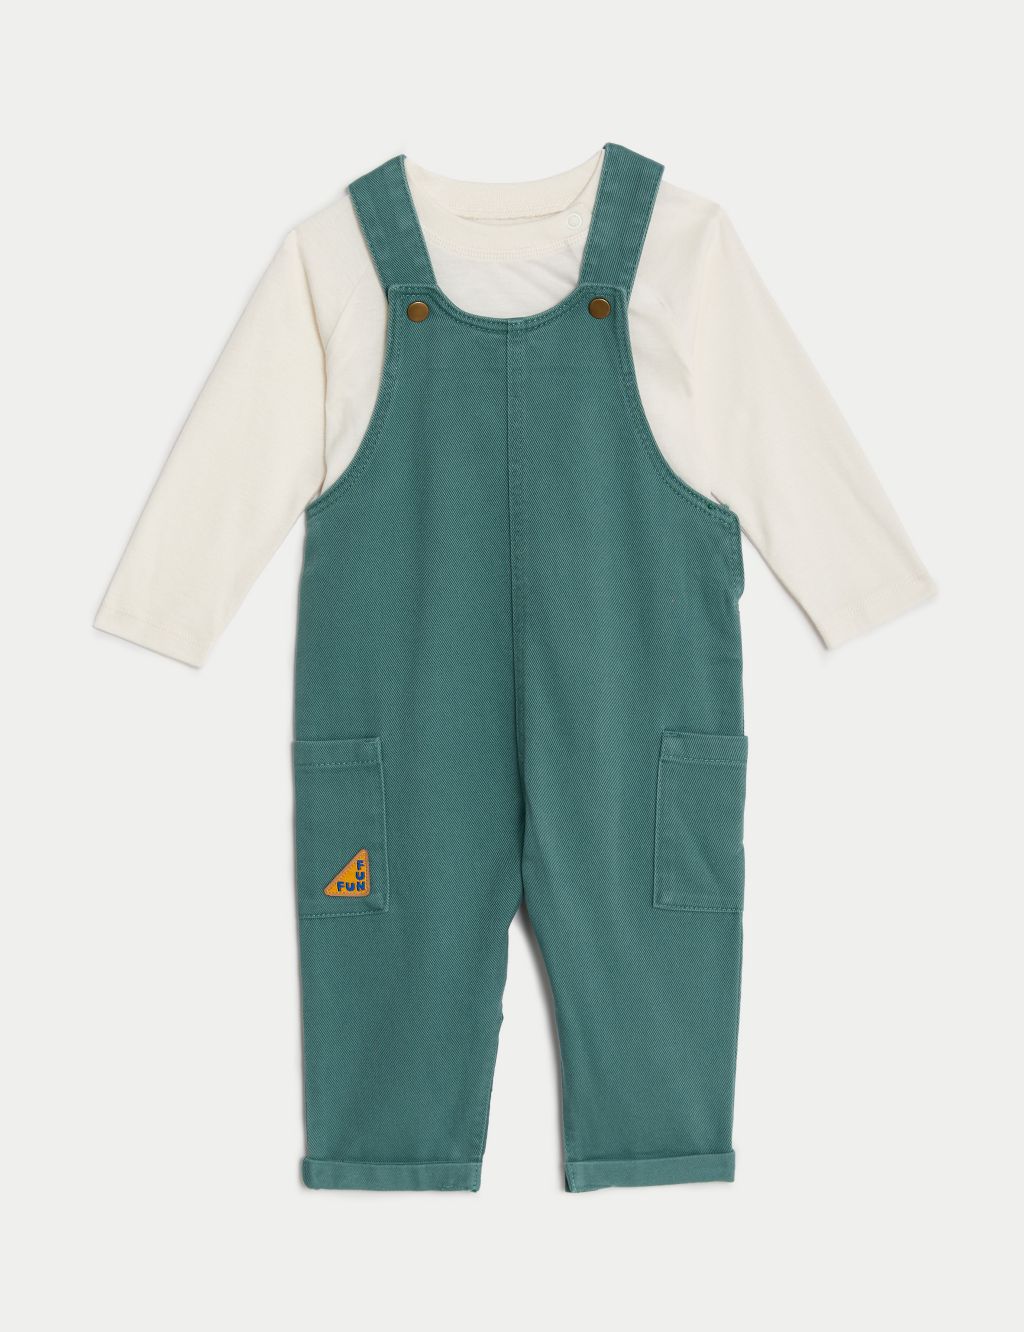 2pc Pure Cotton Outfit (0-3 Yrs) image 1